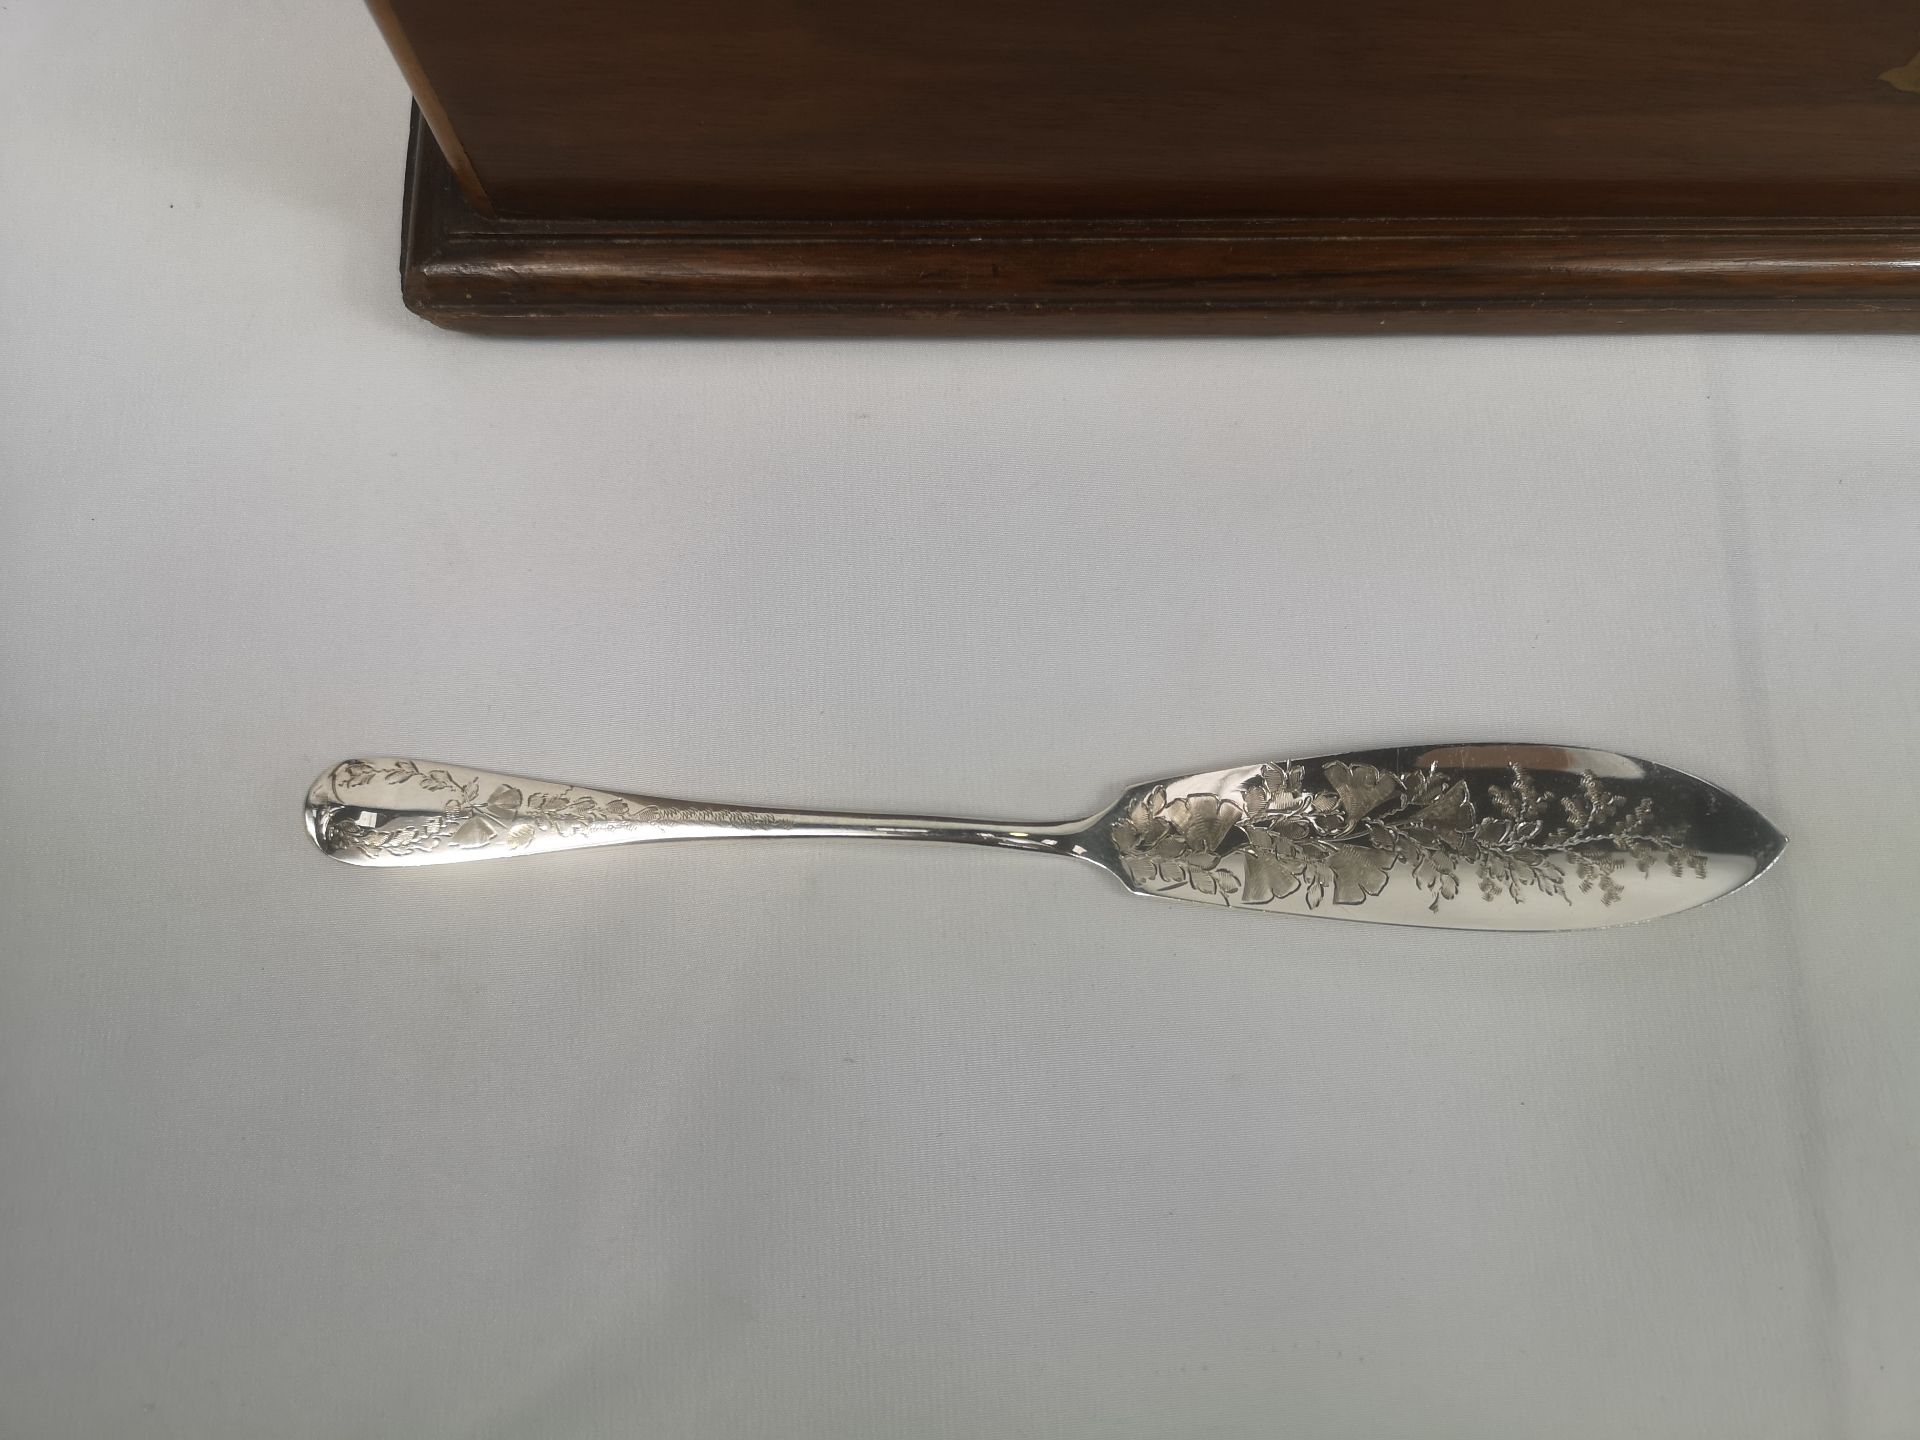 Canteen of silver plate fish knives and forks - Image 3 of 5